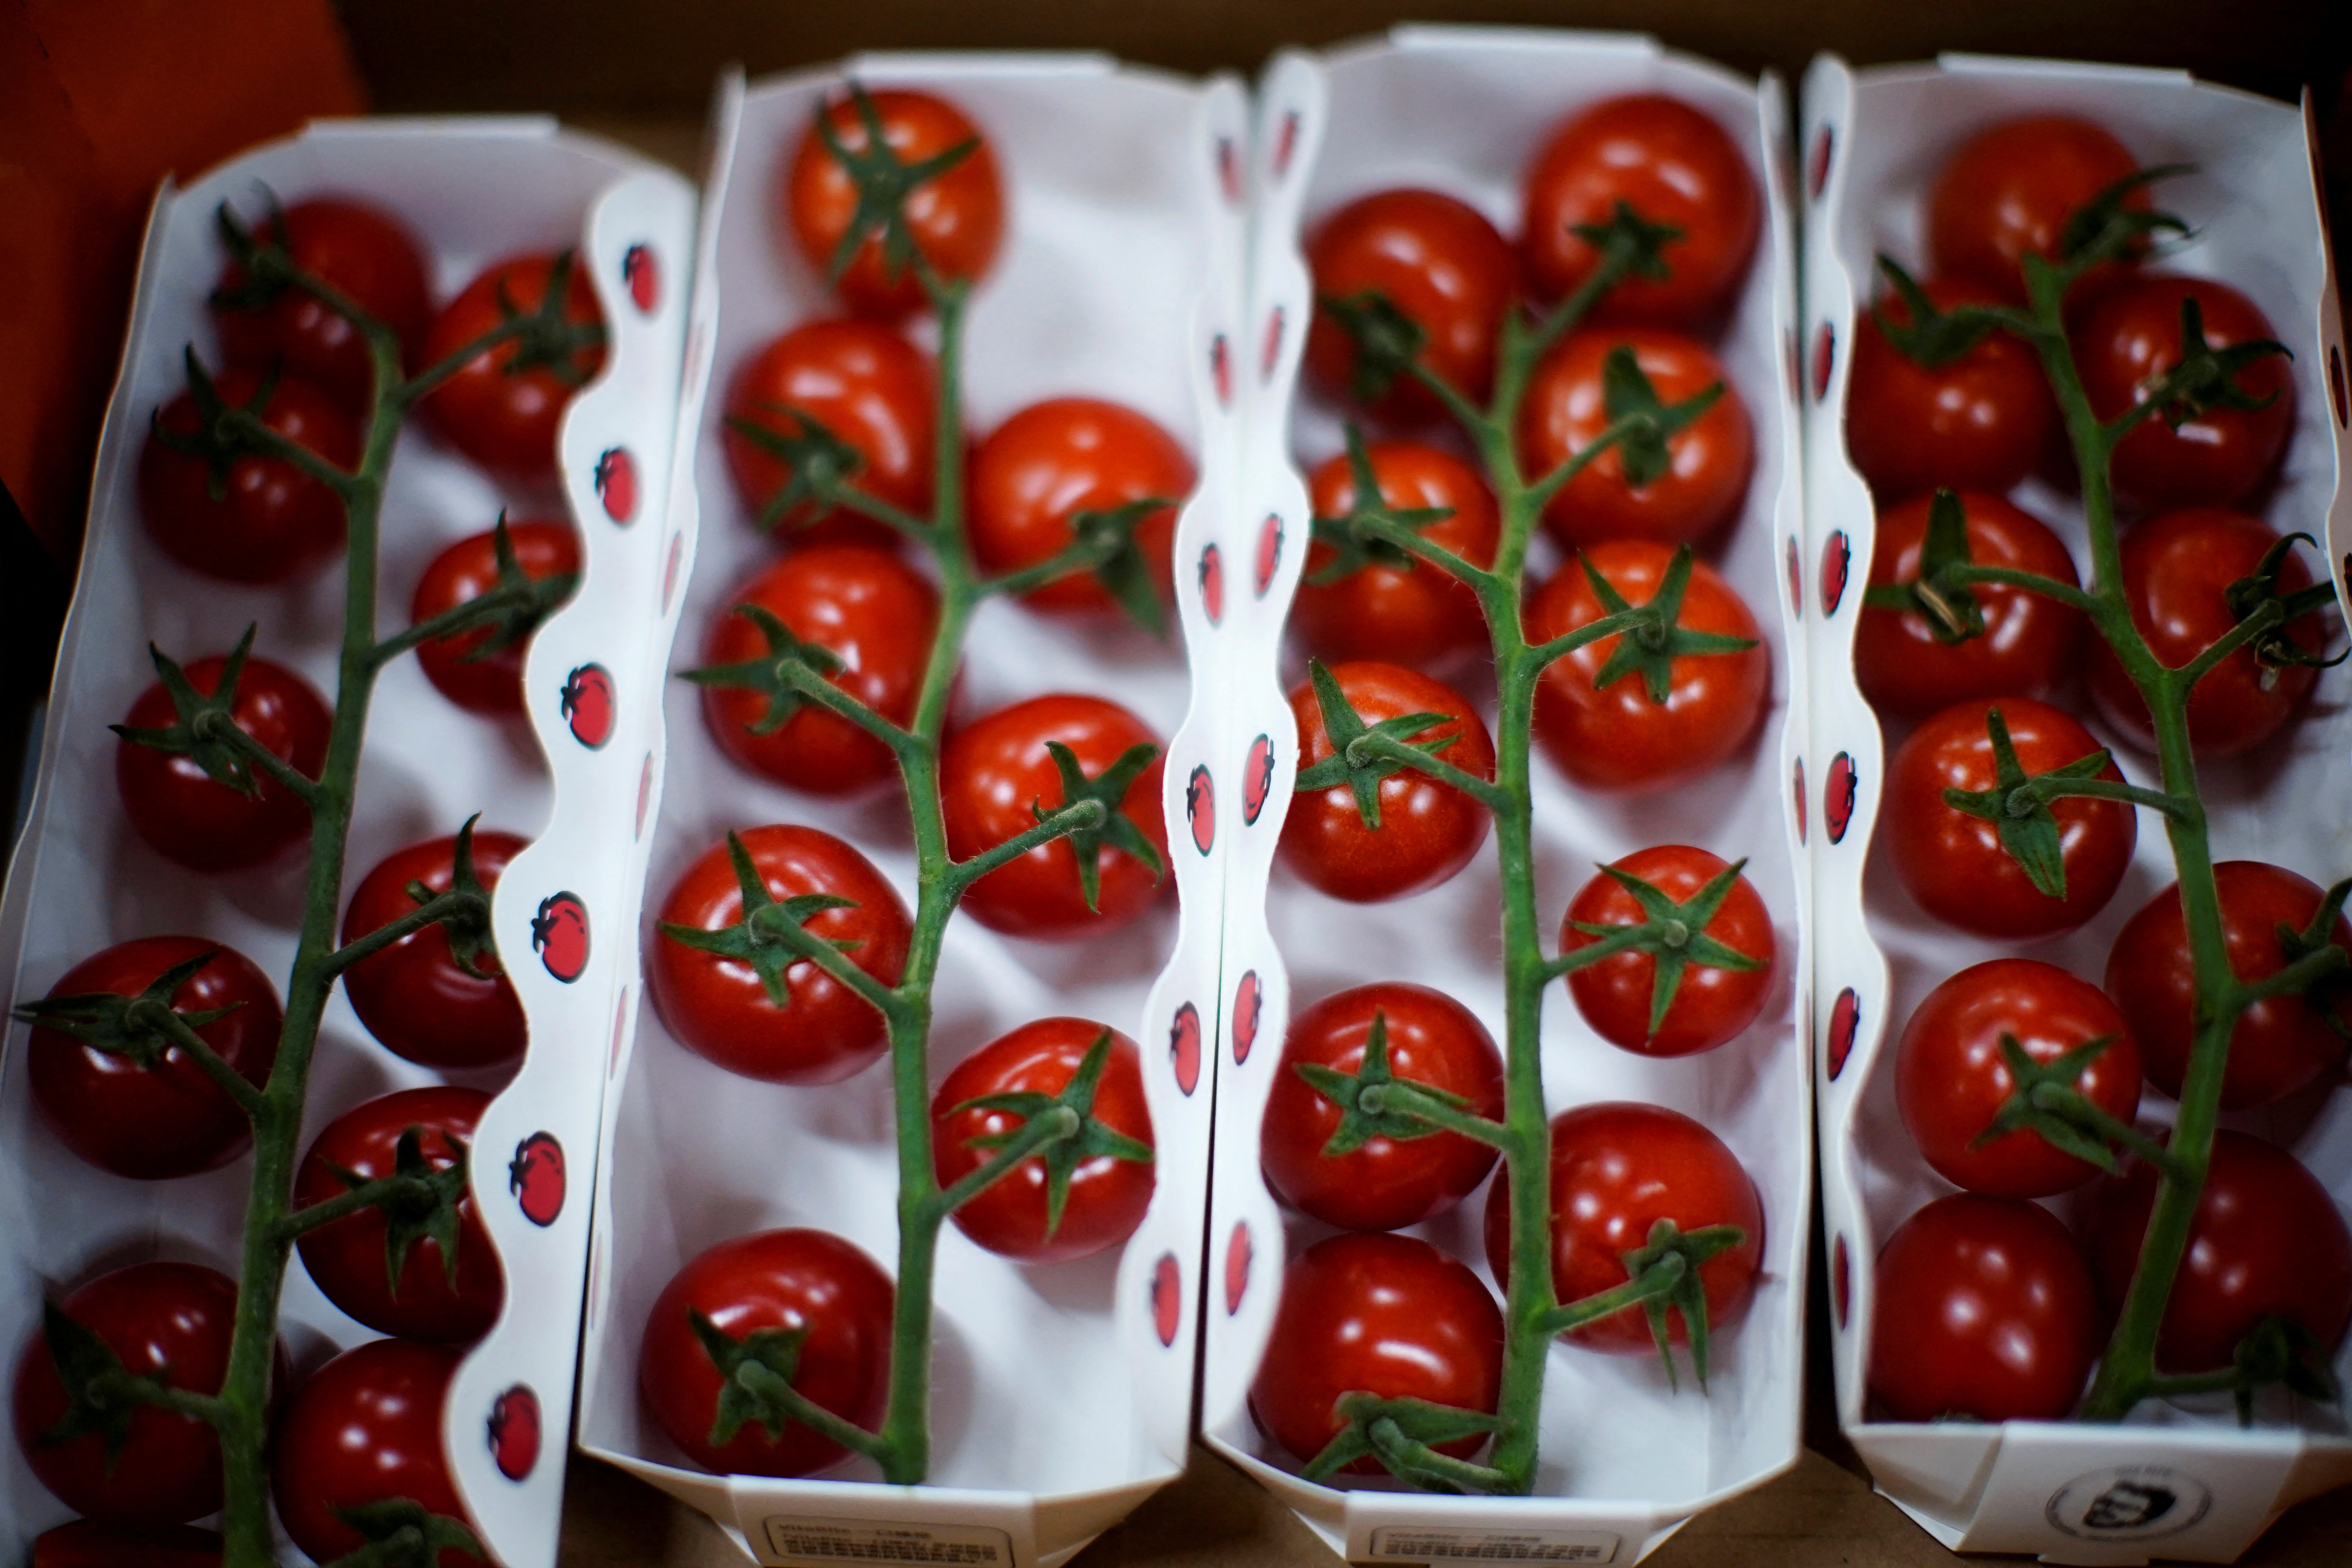 Tomatoes are seen at Hengda greenhouse in Shanghai